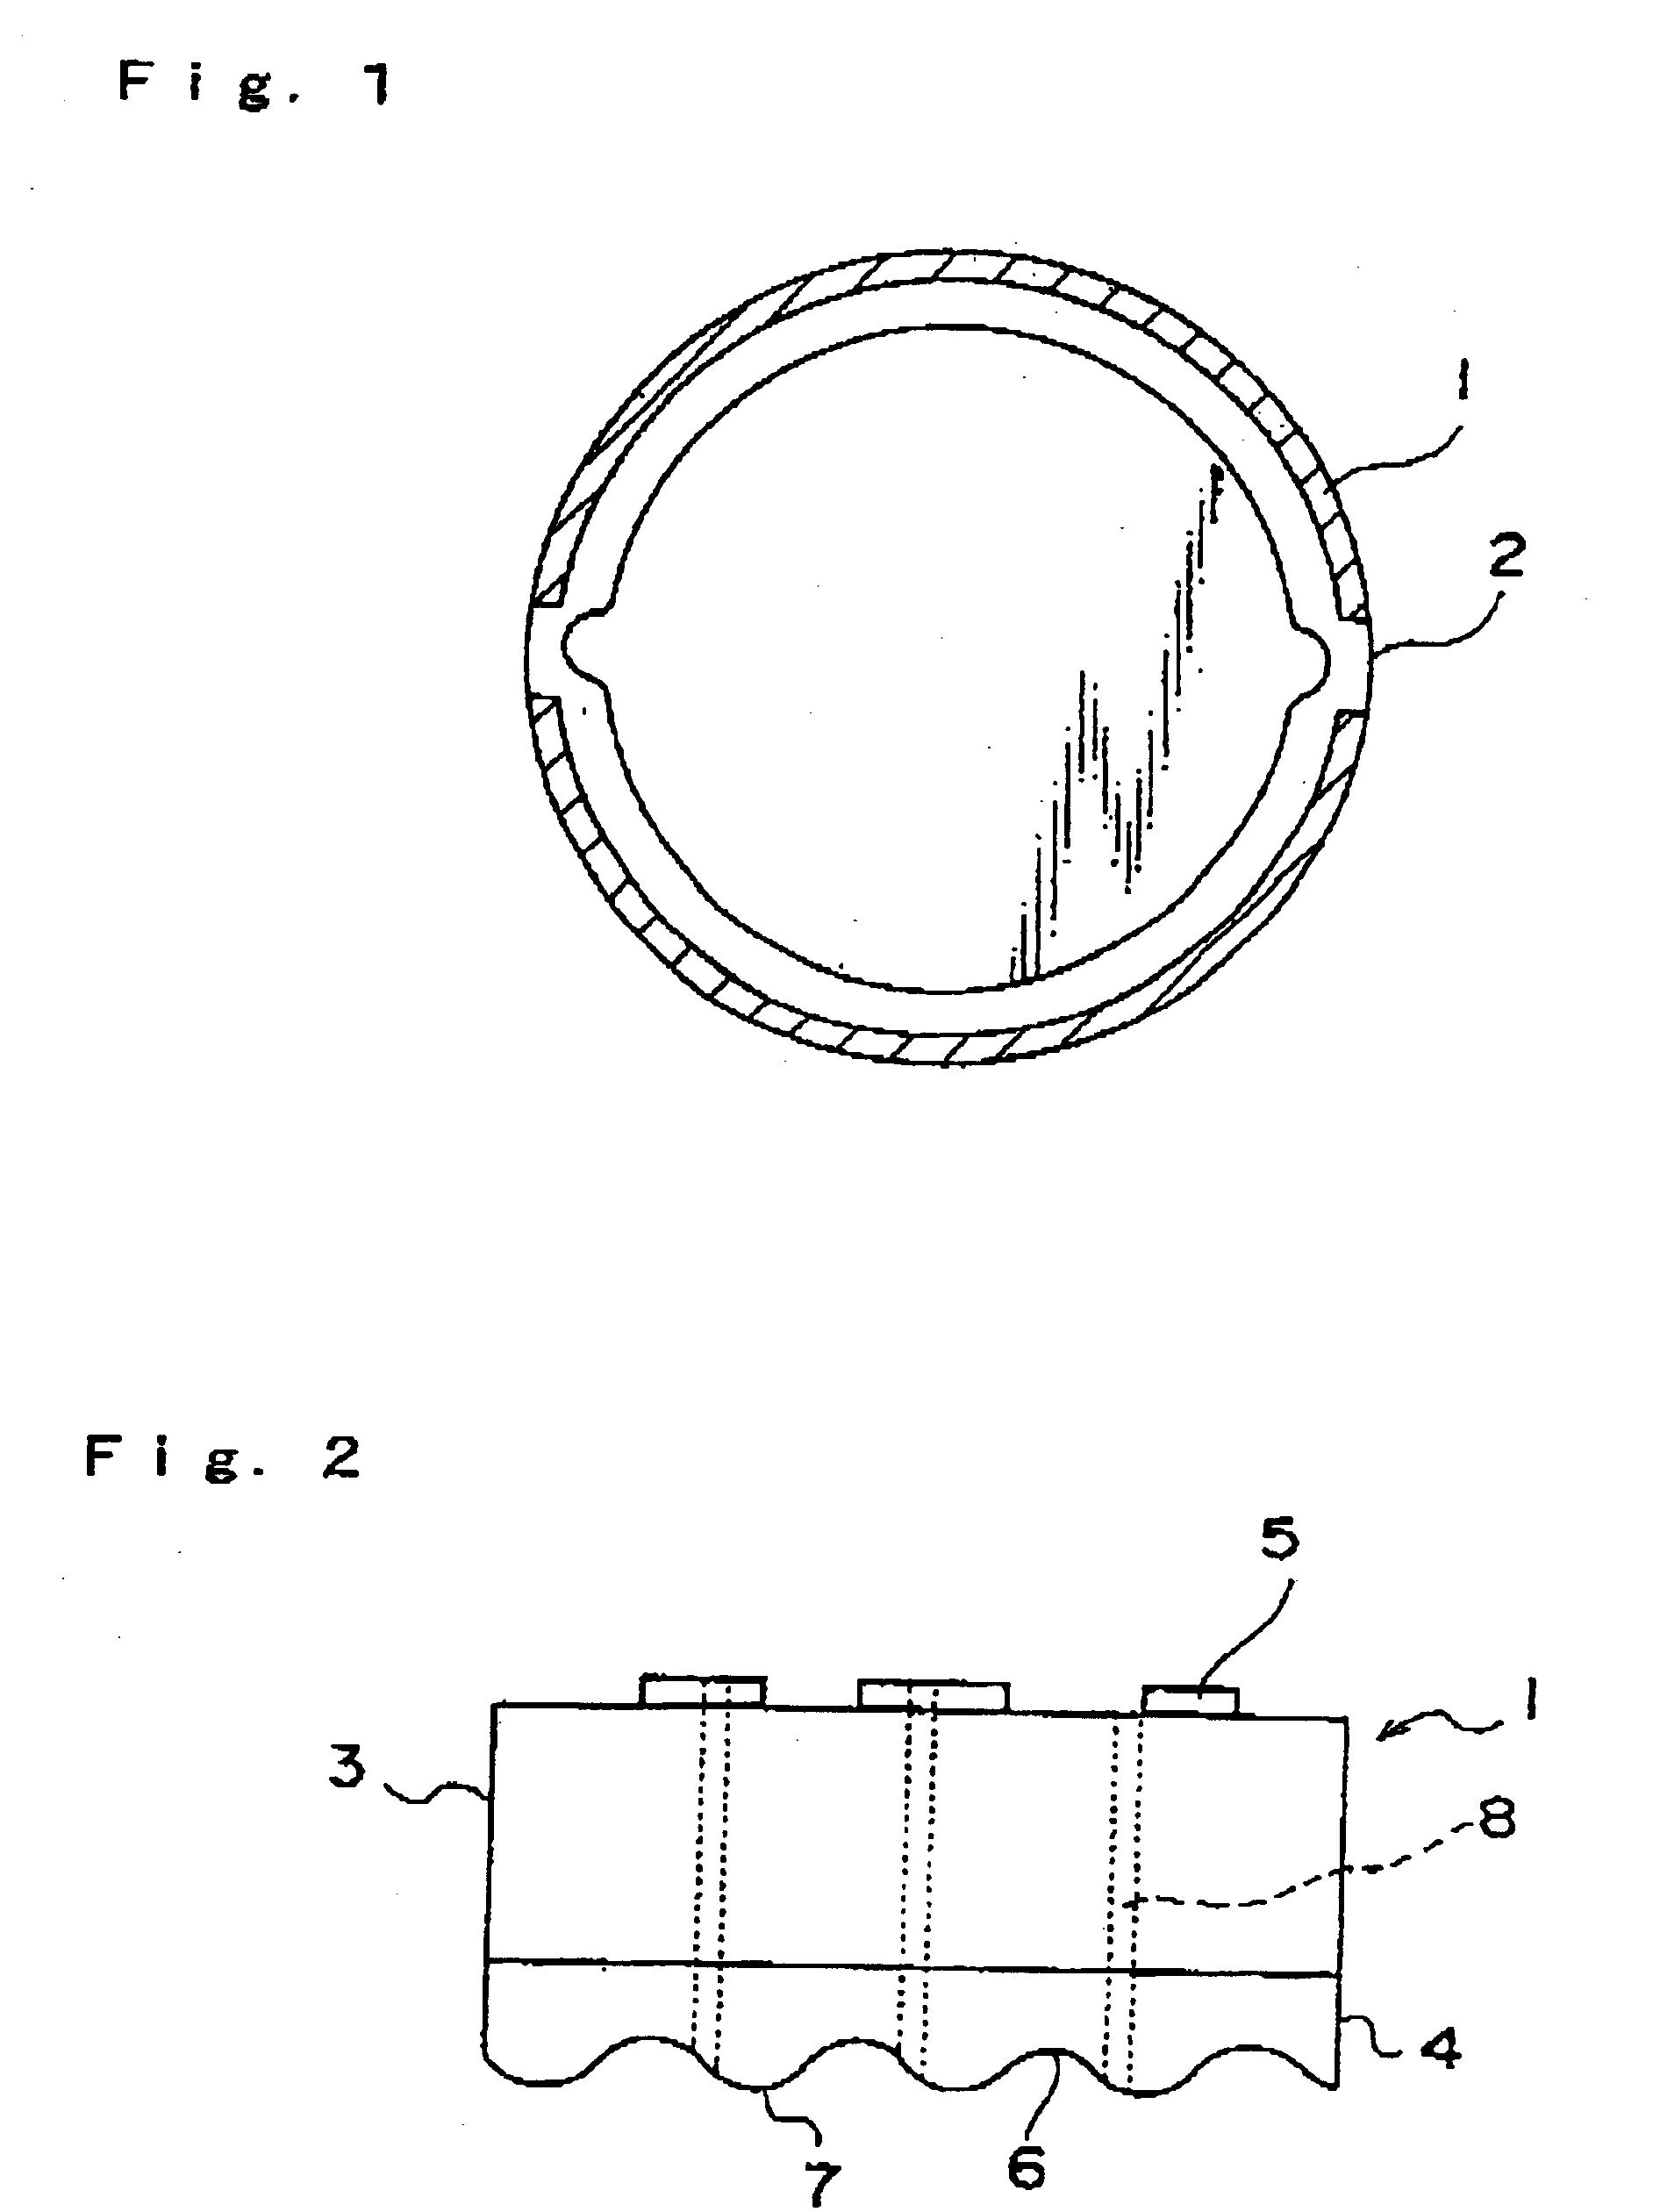 Labels for in-mold forming and molded resin products having the same